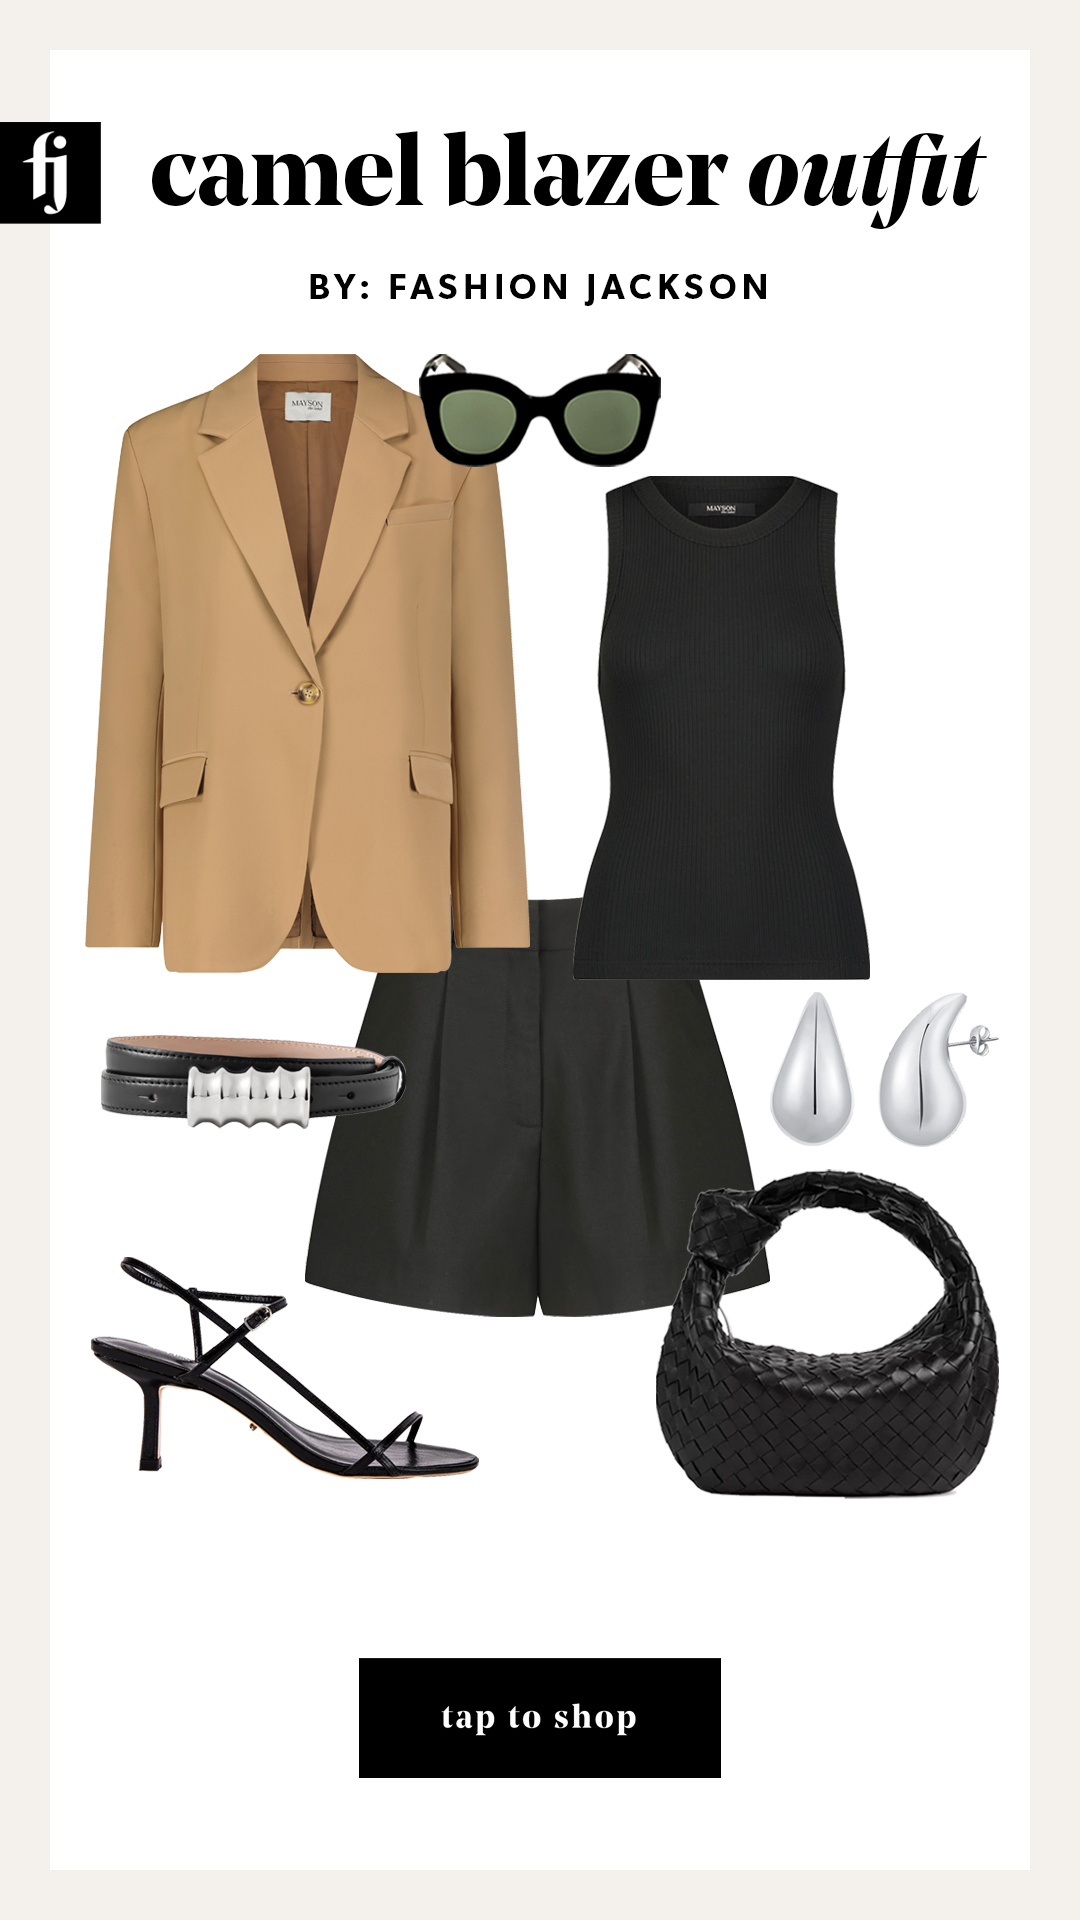 camel blazer outfit idea dressed up with shorts